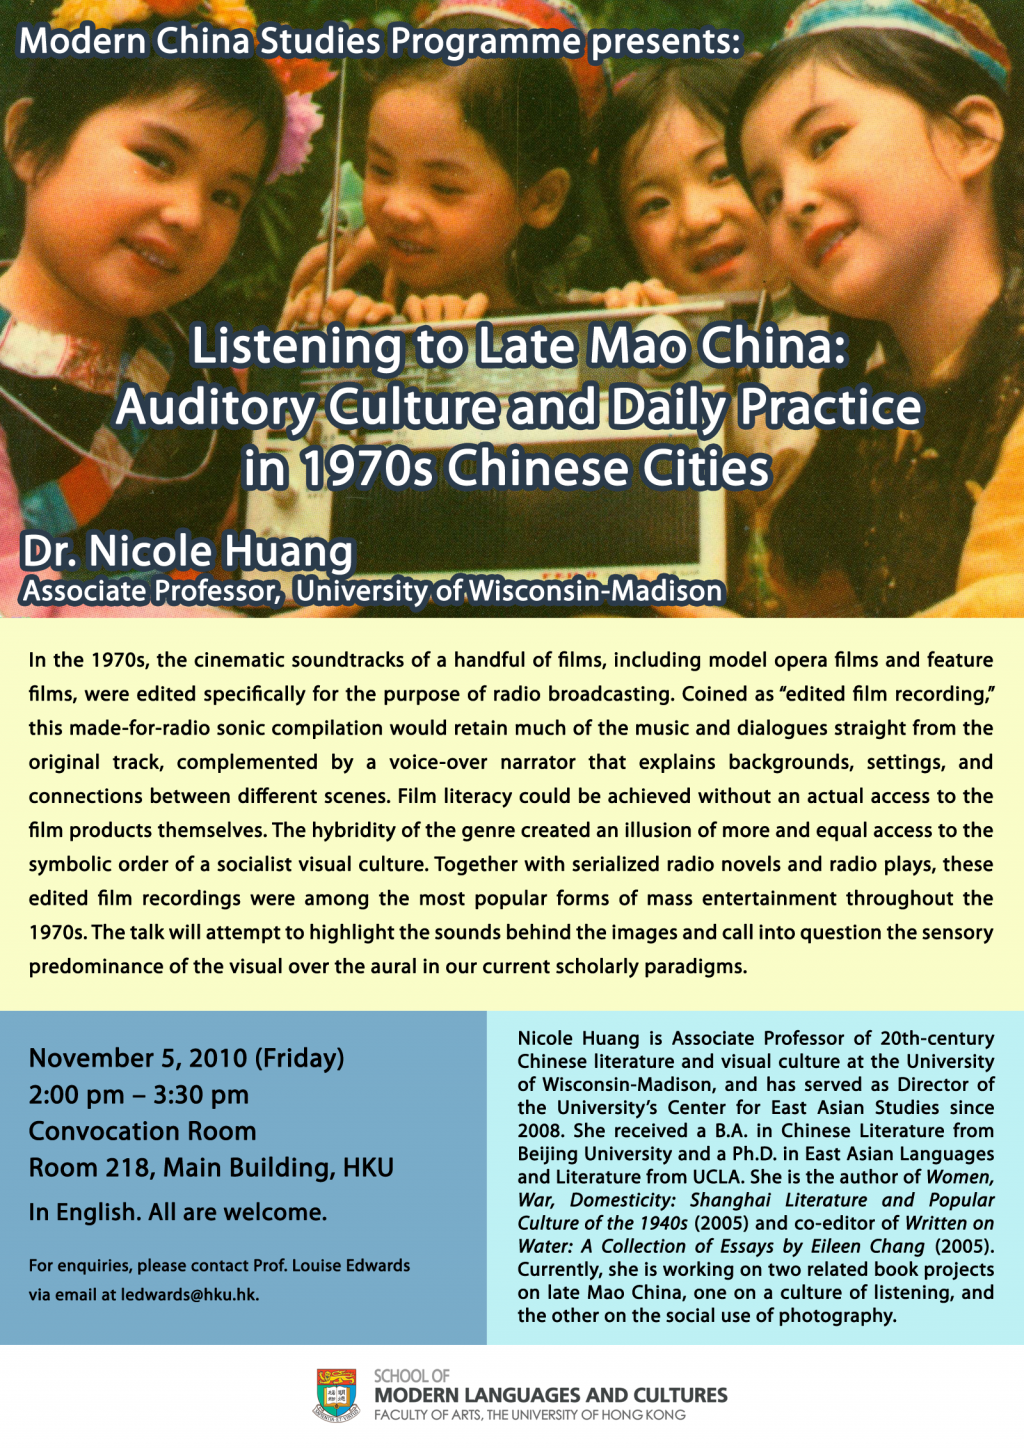 Talk: Listening to Late Mao China: Auditory Culture and Daily Practice in 1970s Chinese Cities